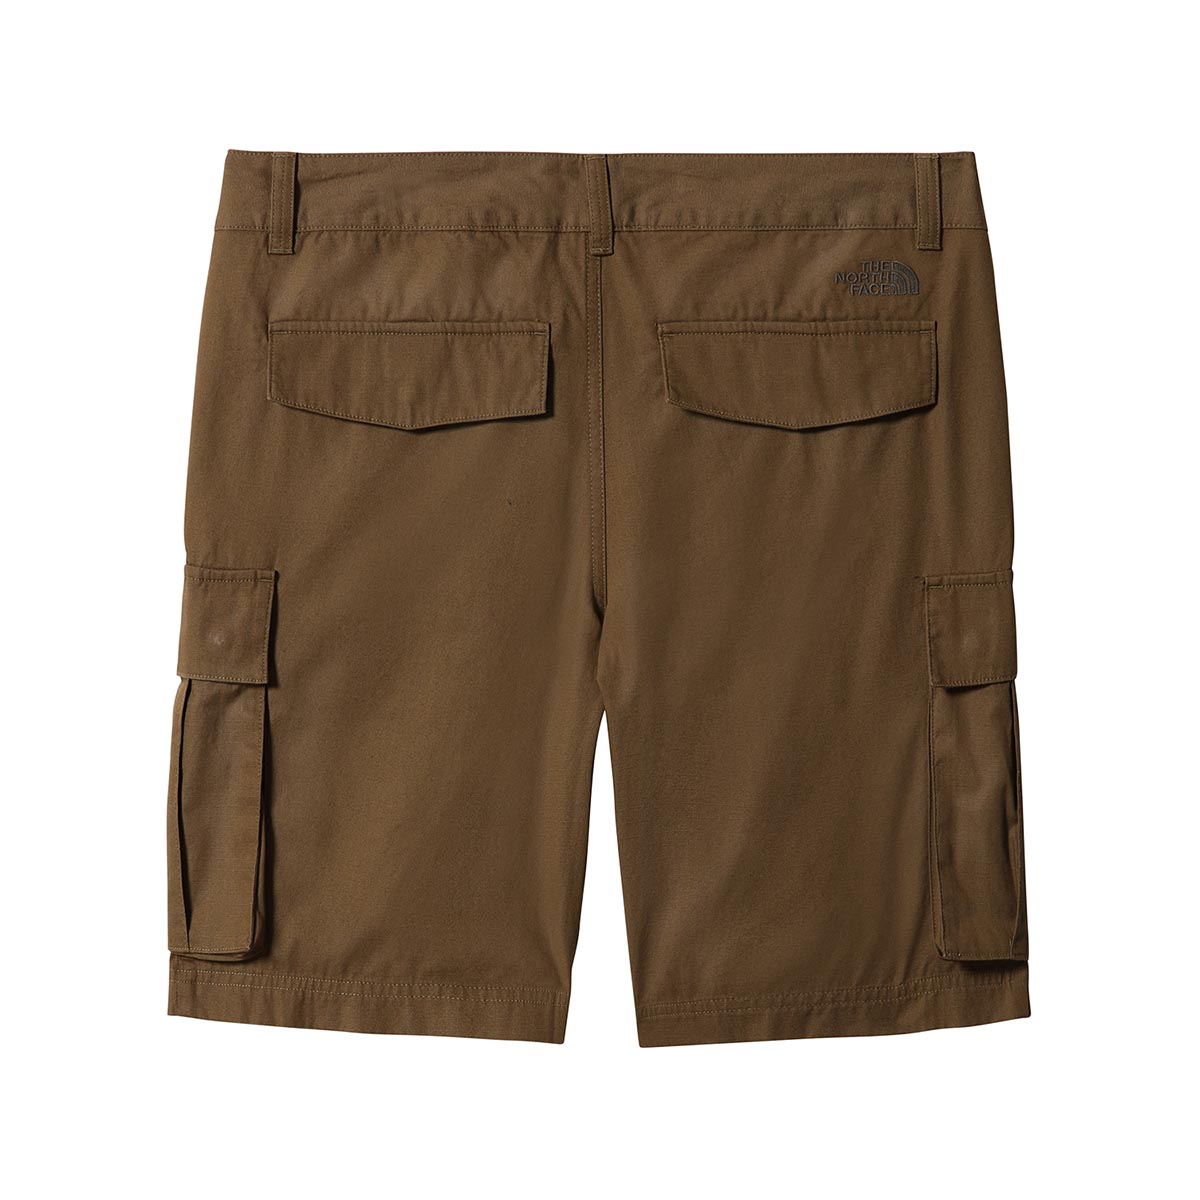 THE NORTH FACE - ANTICLINE CARGO SHORTS